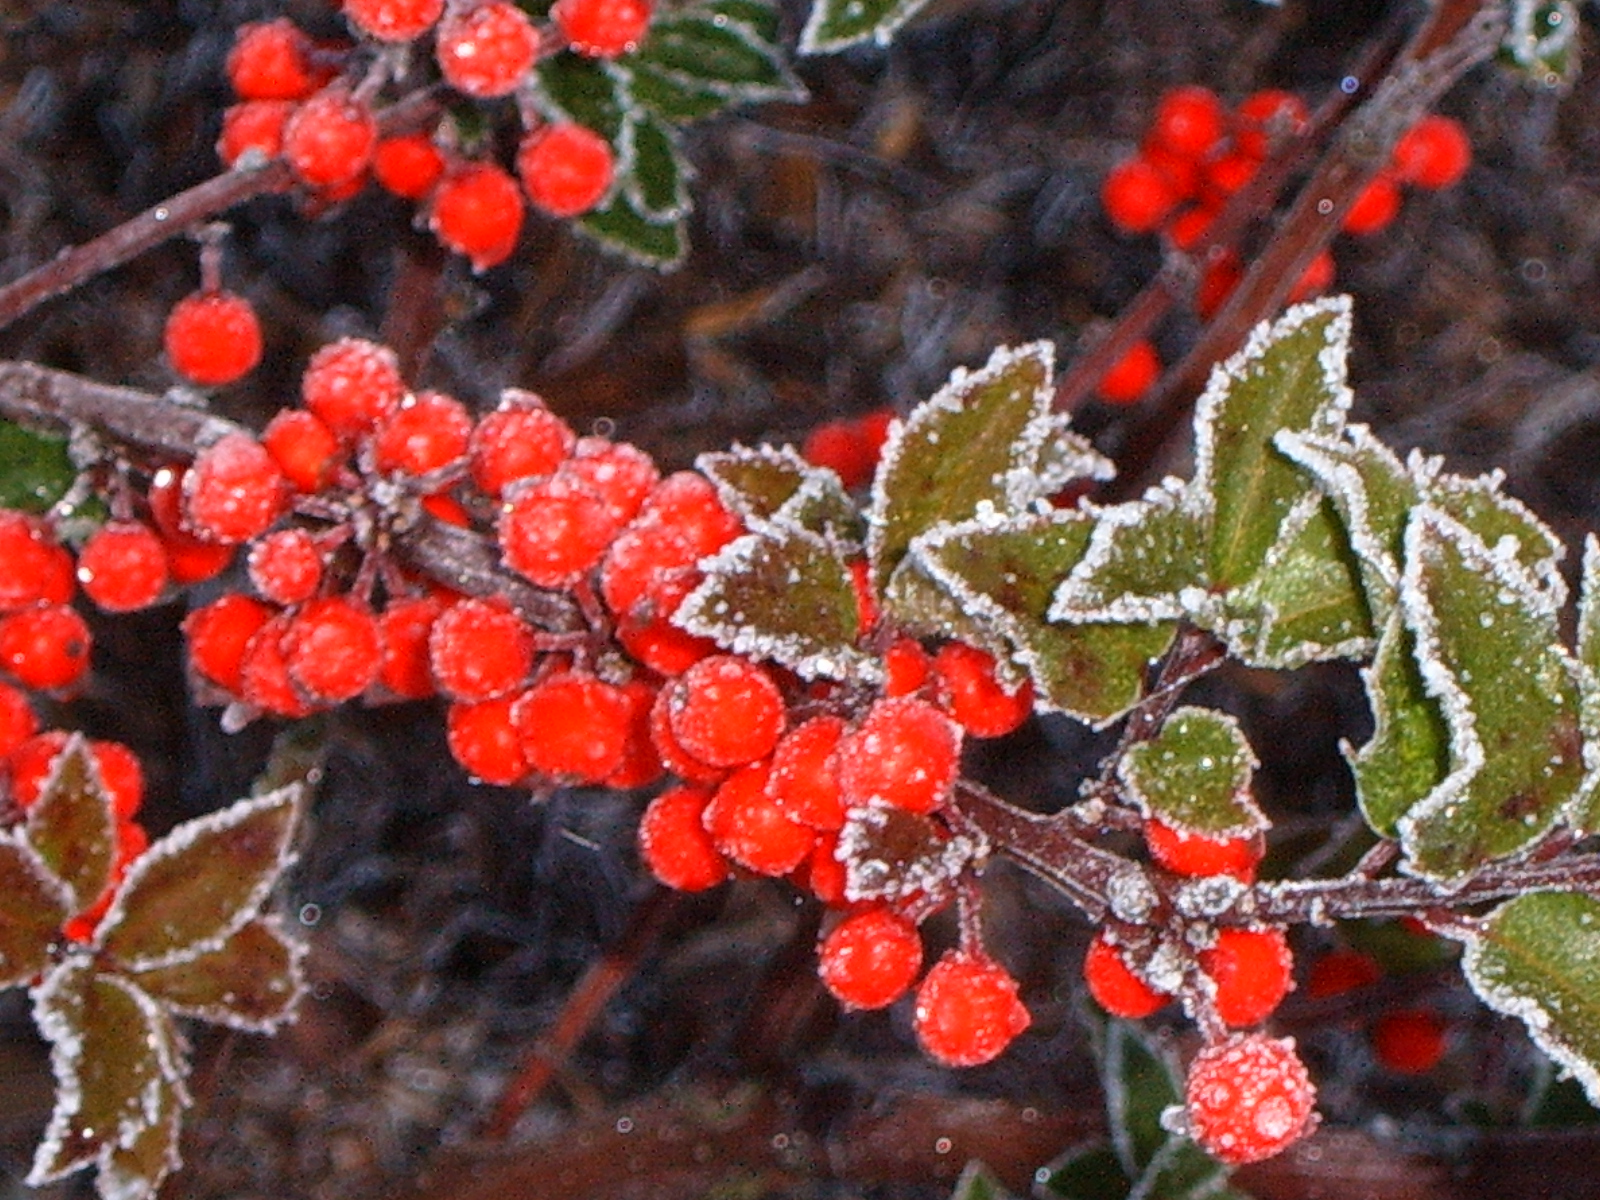 Frost on Berries (user submitted)